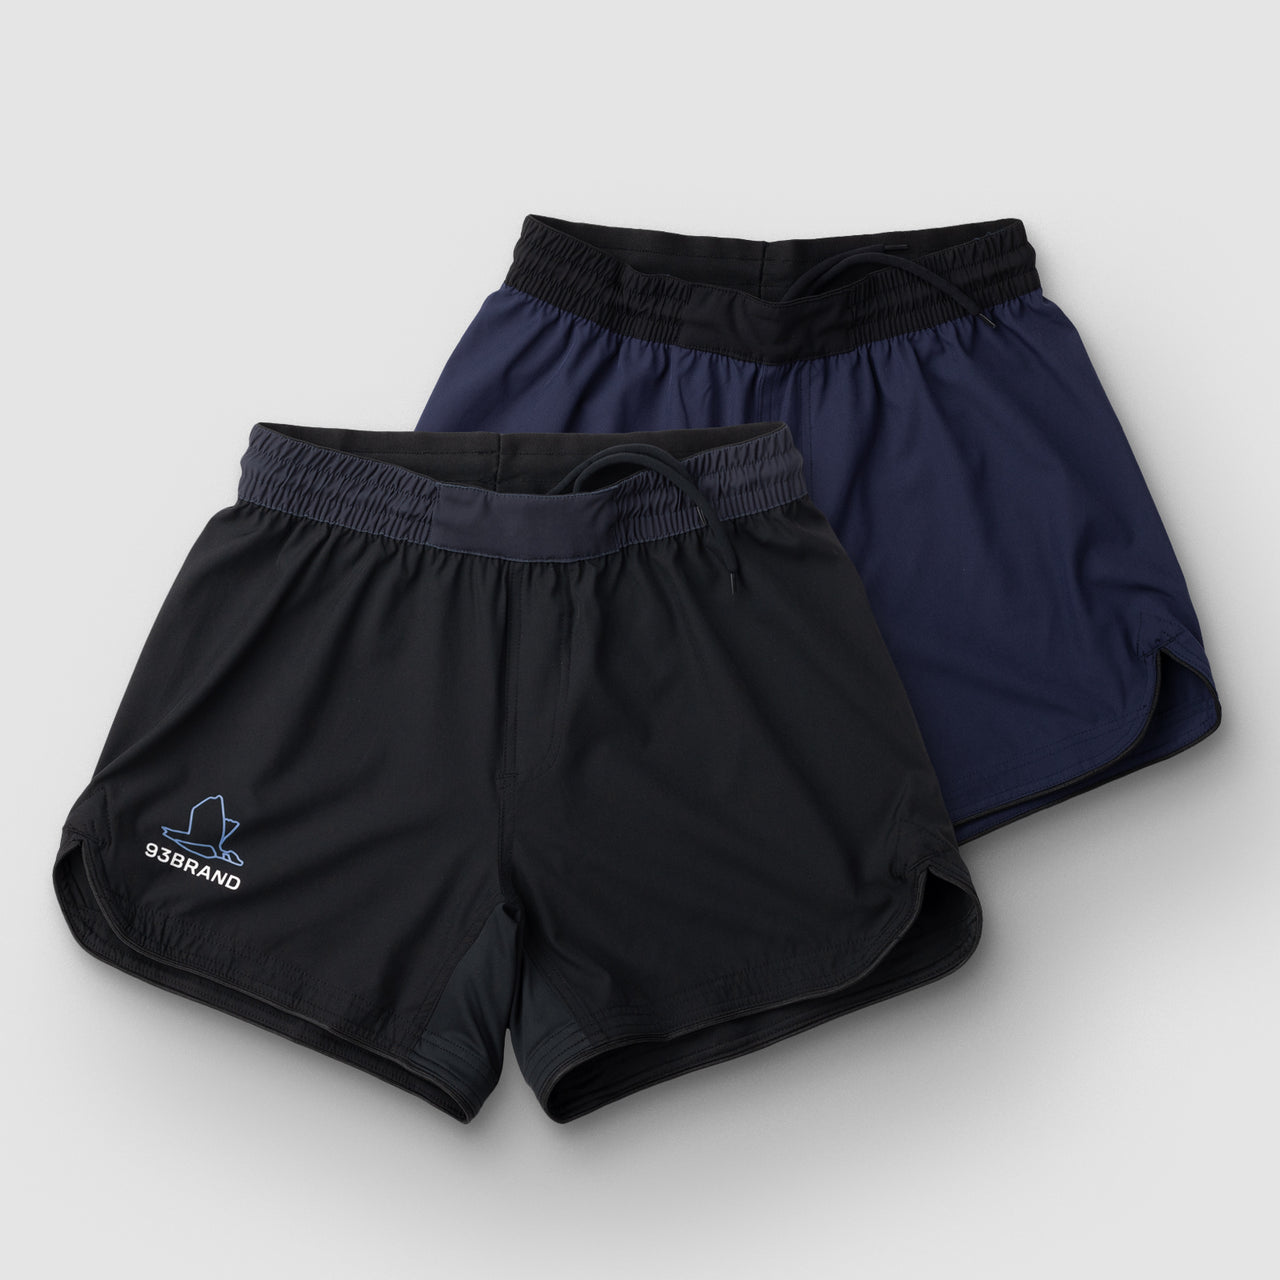 93brand Standard Issue Grappling Shorts 2PACK (Short Length) Black/Midnight & French Navy